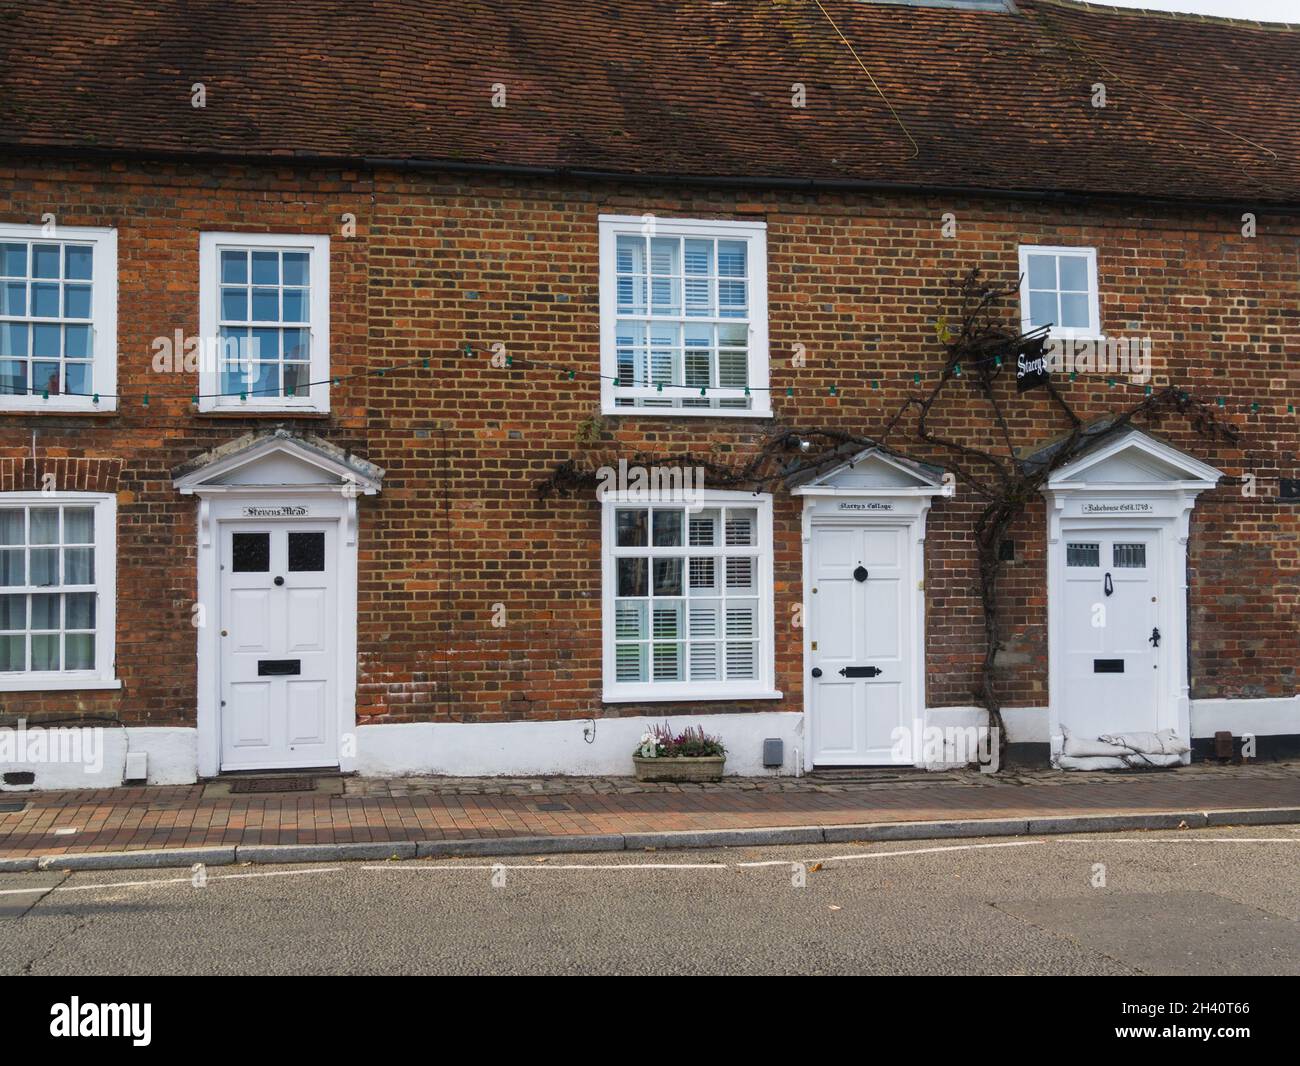 Row of red bricked cottages with white doors including Bakehouse dating to 1749 Chalfont St Giles Buckinghamshire England UK Stock Photo